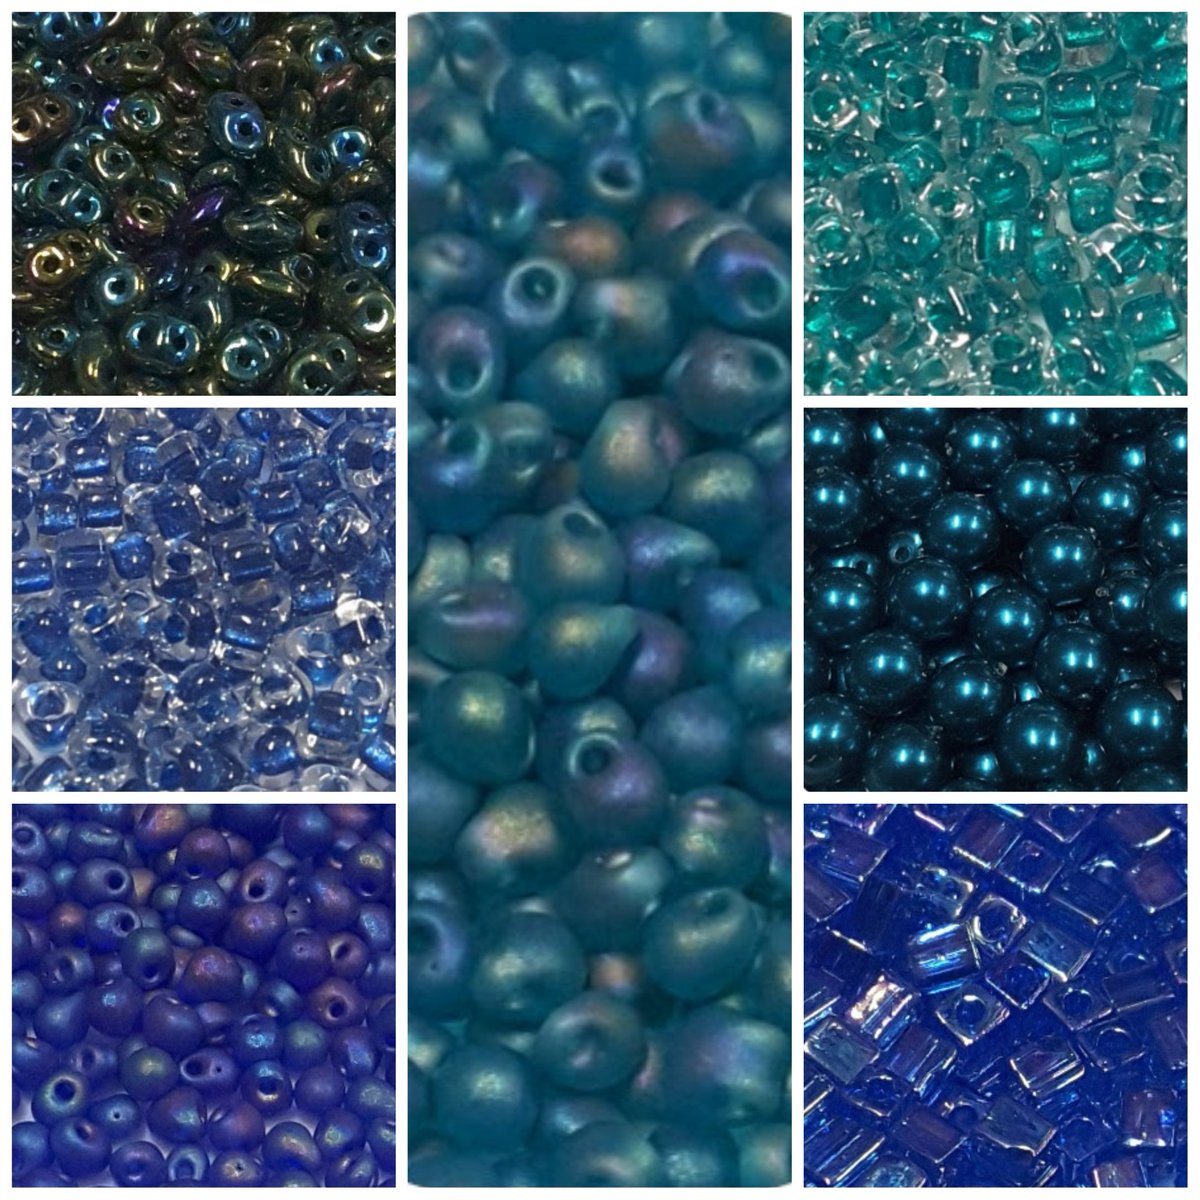 Glass Beads in shades of green and blue from beadmonster.co.uk
#BeadMonster #Beads #EverythingsBetterWithBeads